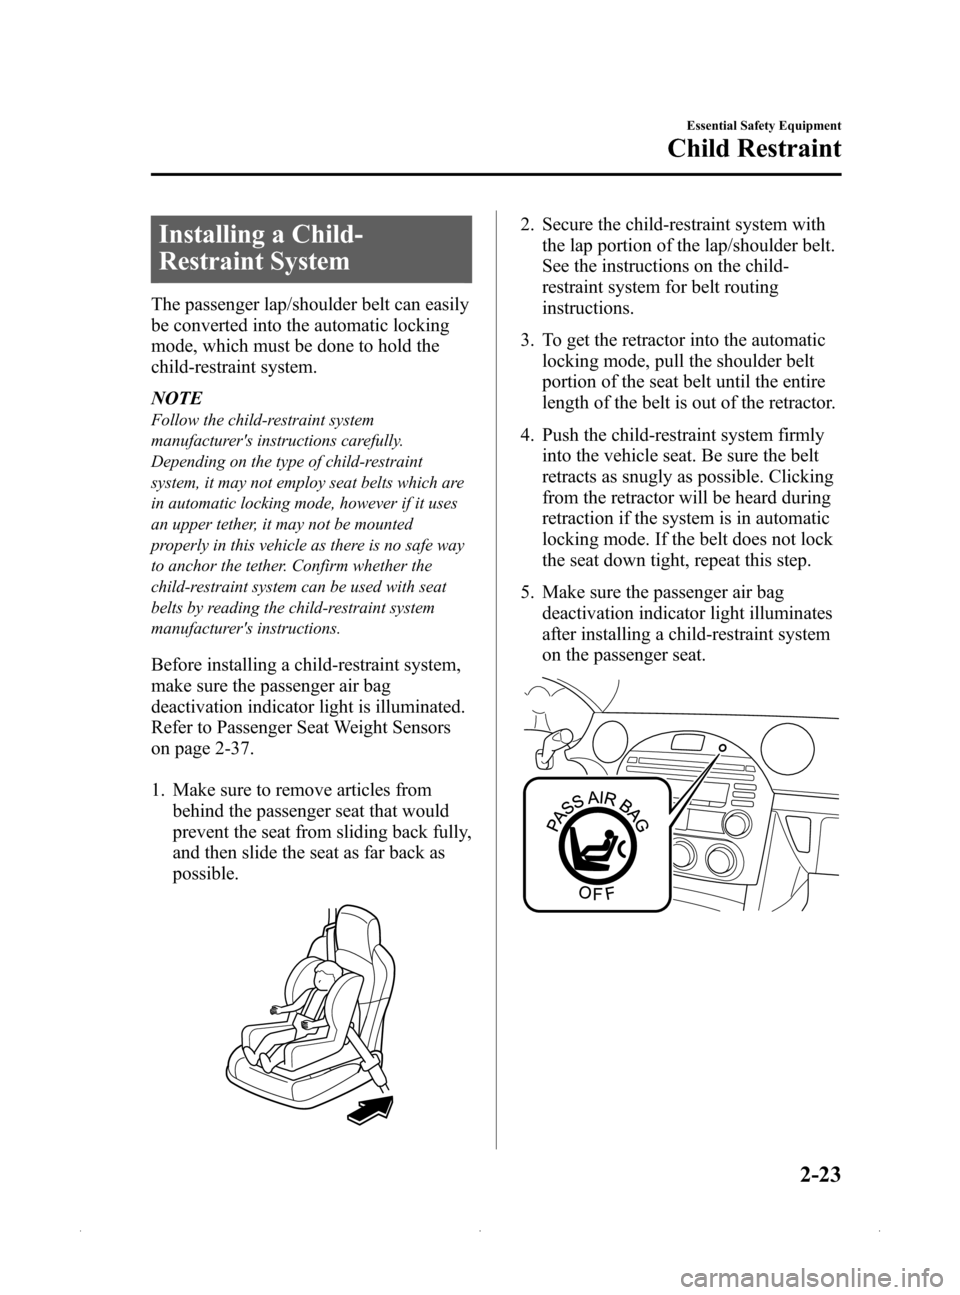 MAZDA MODEL MX-5 2015  Owners Manual (in English) Black plate (35,1)
Installing a Child-
Restraint System
The passenger lap/shoulder belt can easily
be converted into the automatic locking
mode, which must be done to hold the
child-restraint system.
